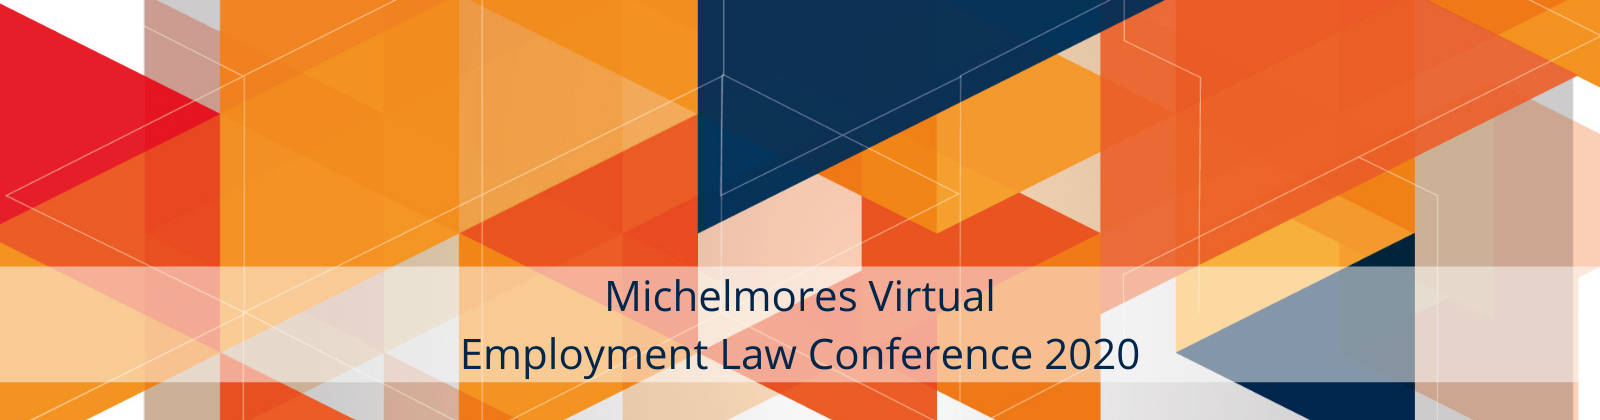 Michelmores Employment Law Conference 2020